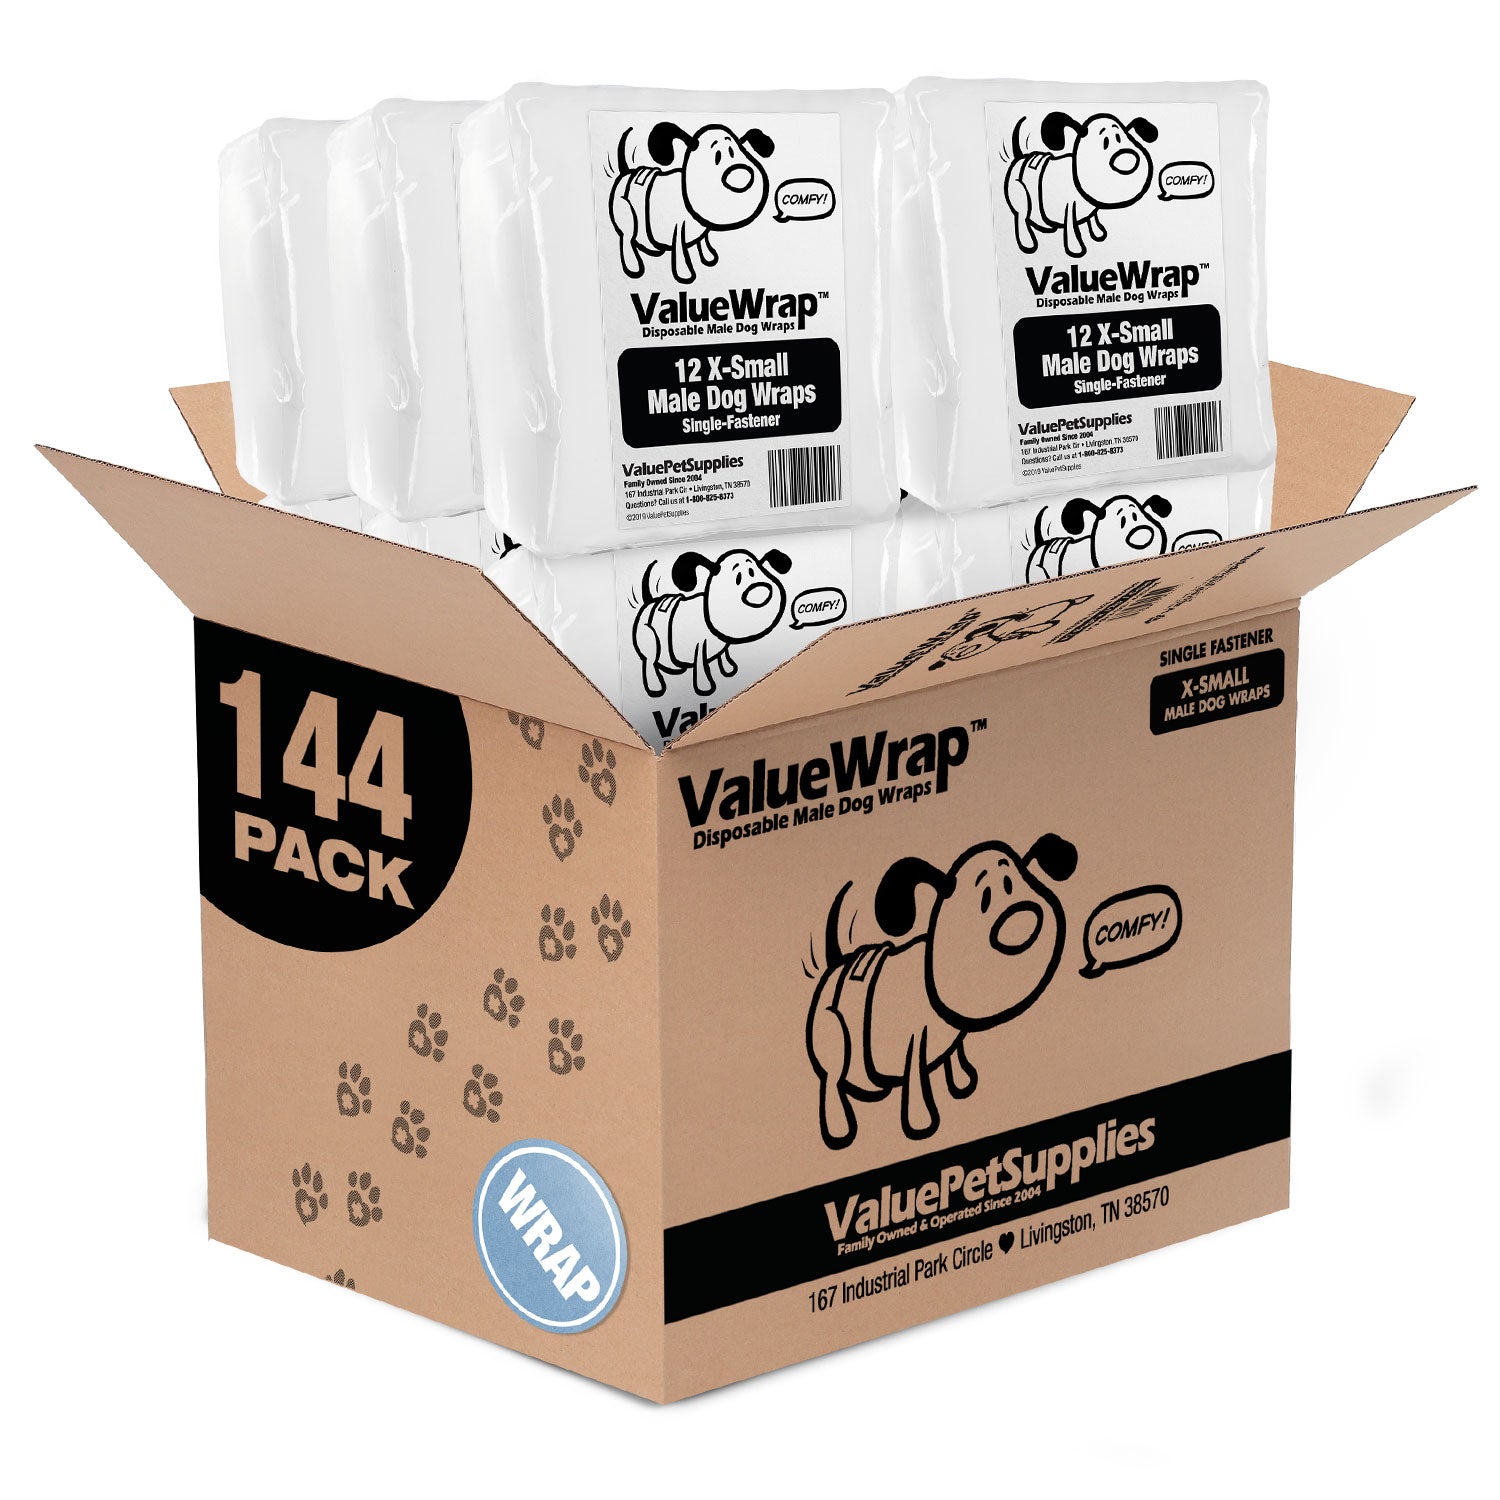 NEW- ValueWrap Male Wraps, Disposable Dog Diapers, 1-Tab X-Small, Lavender, 144 Count